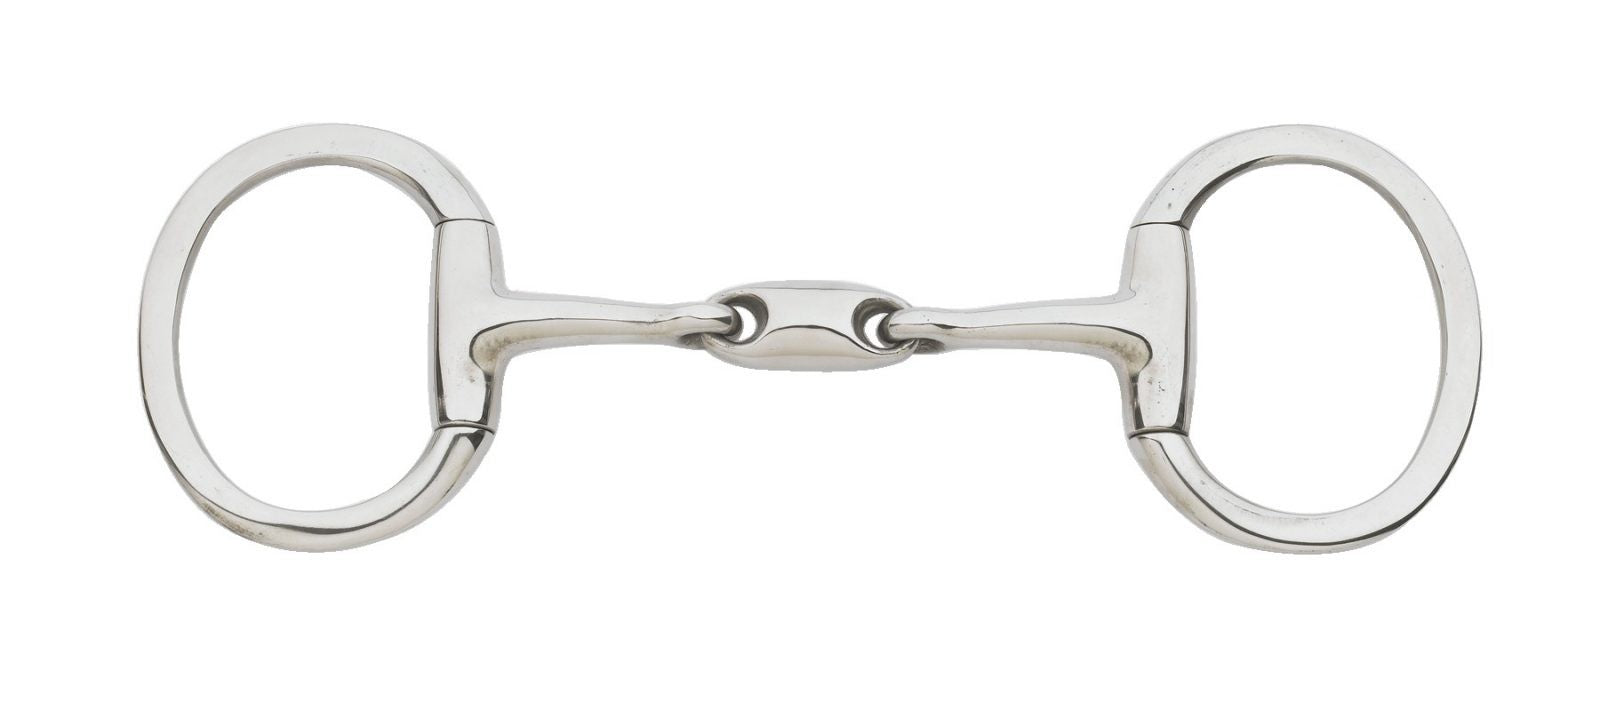 Ovation Curved Eggbutt With Bean Snaffle